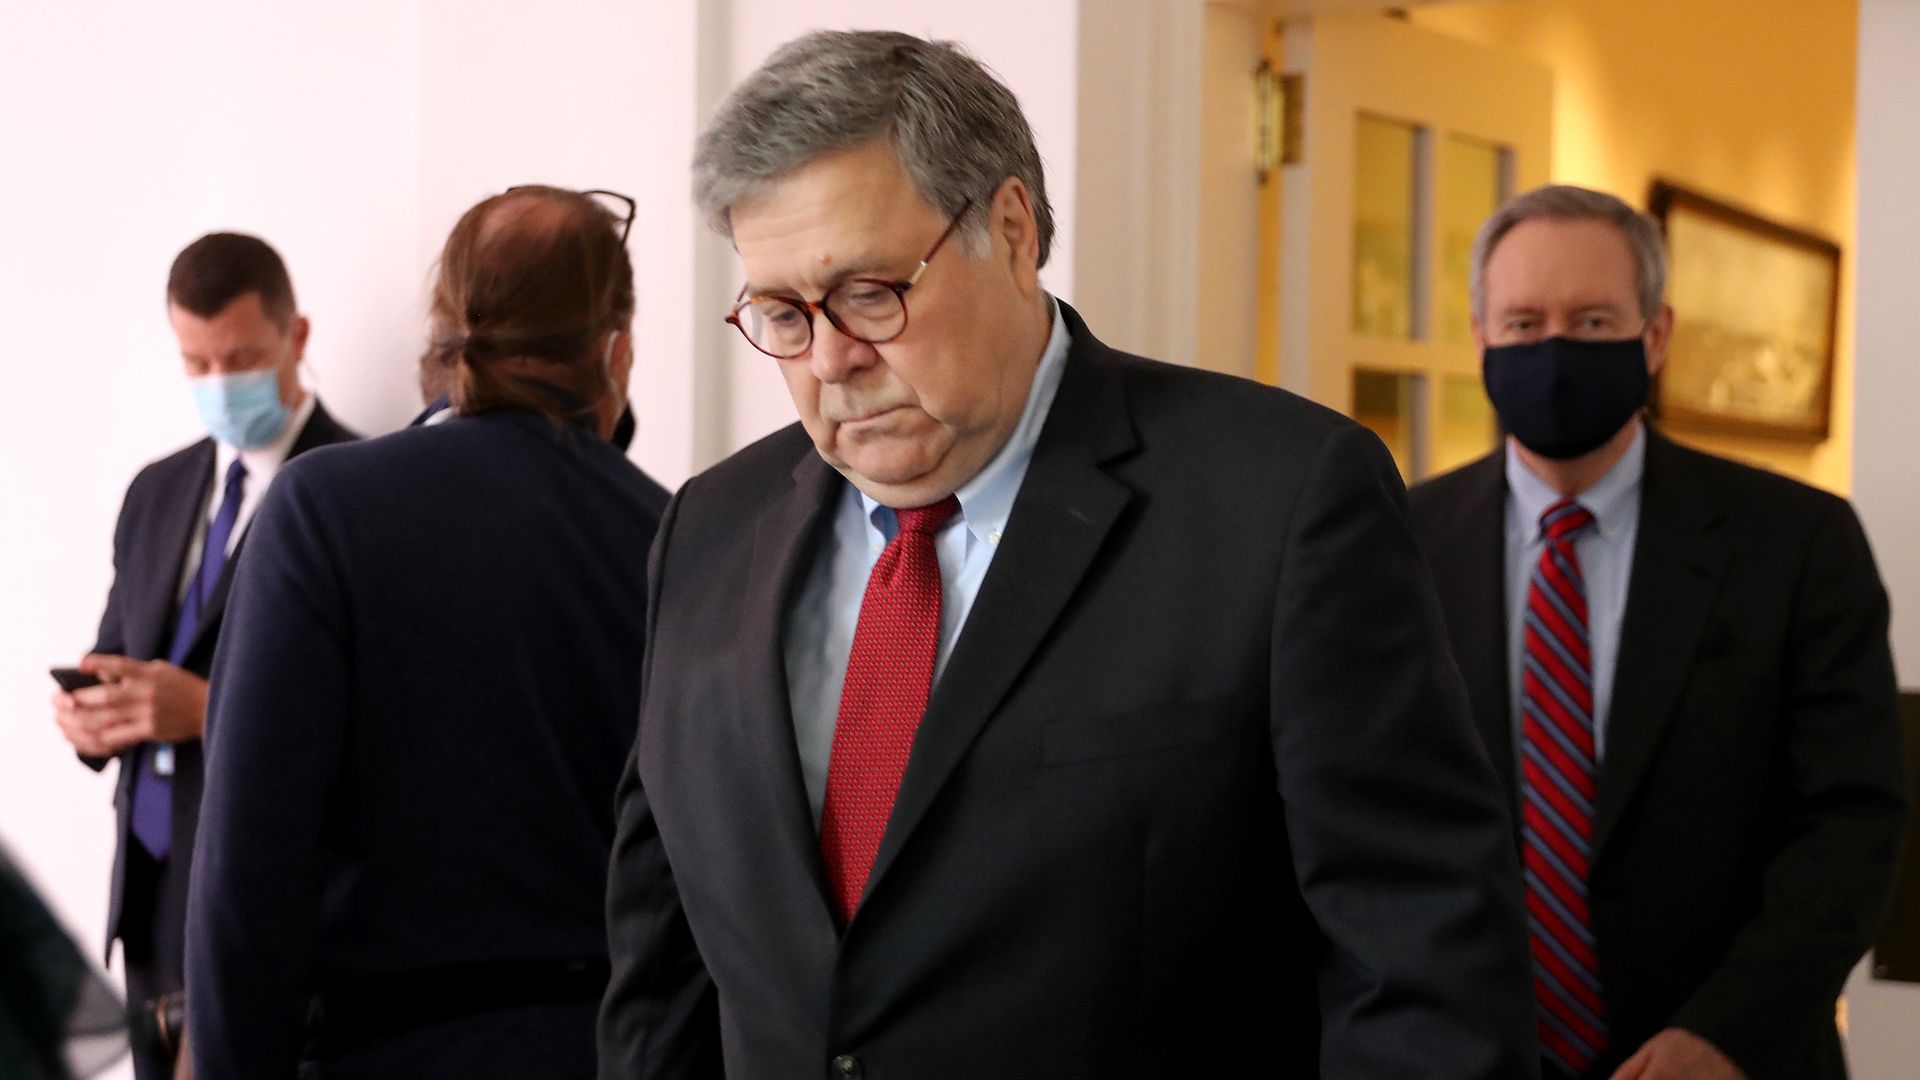 Attorney General Bill Barr arrives at the Rose Garden of the White House